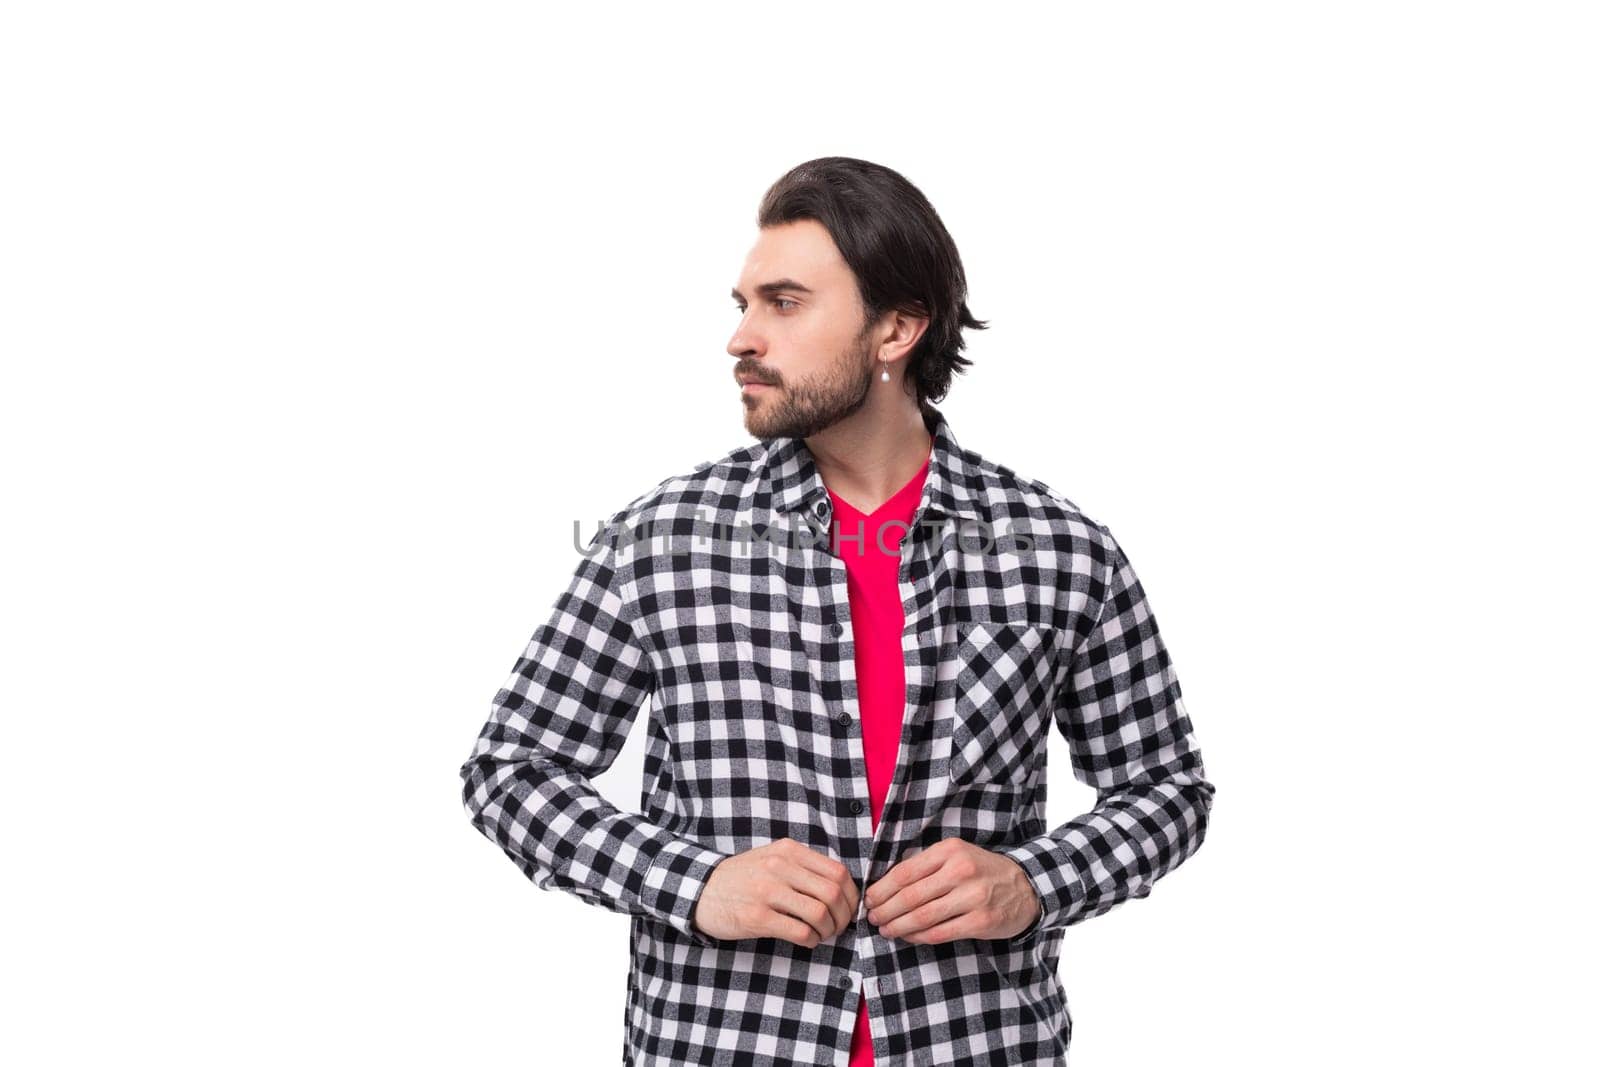 young brutal bearded brunette man in a shirt on a white background with copy space.